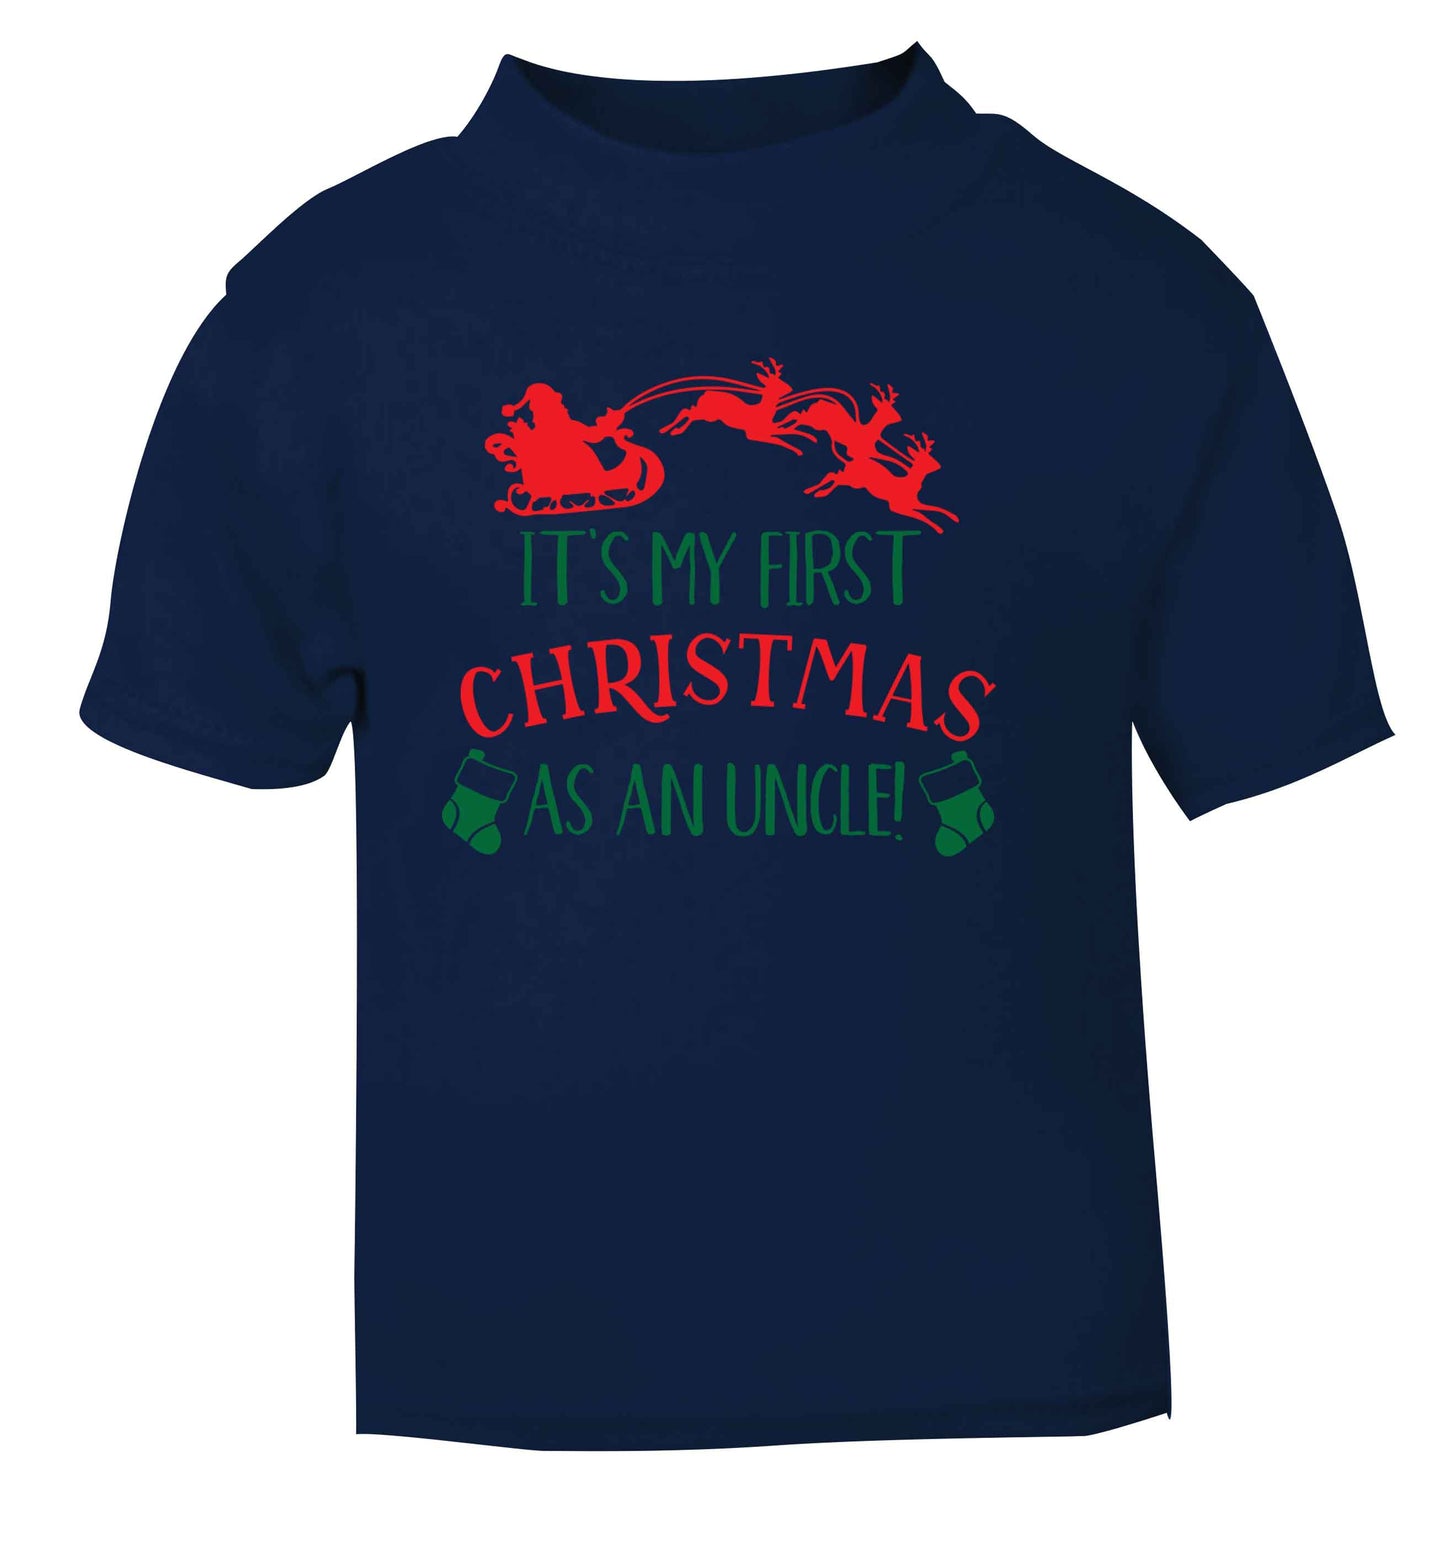 It's my first Christmas as an uncle! navy Baby Toddler Tshirt 2 Years